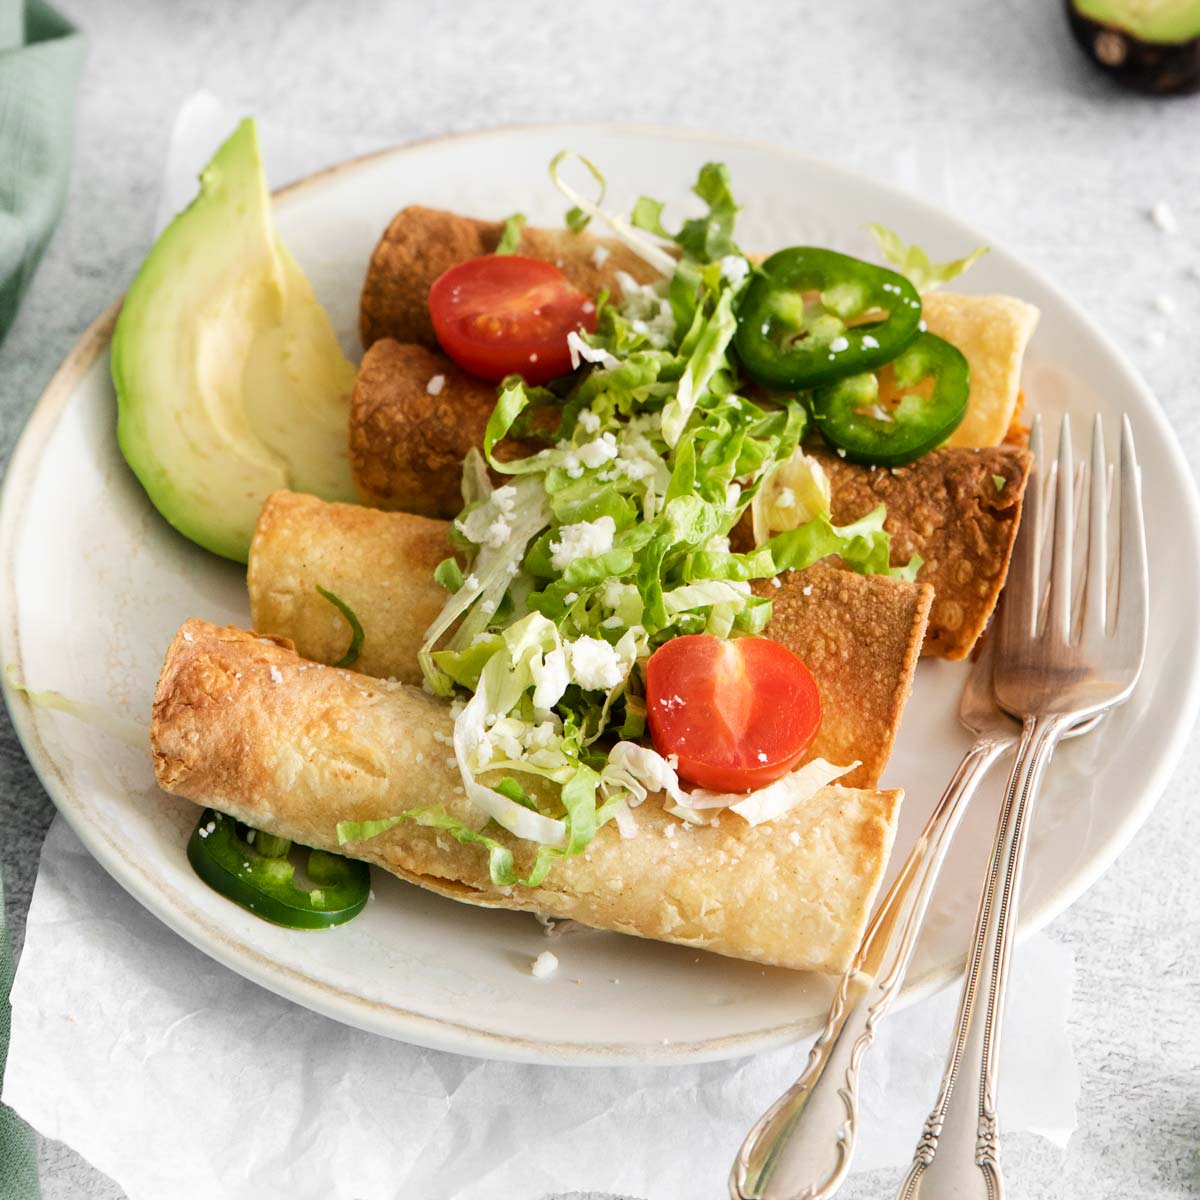 https://fooddoodles.com/wp-content/uploads/2022/03/Air-Fryer-Chicken-Taquitos-picture-1200-1.jpg